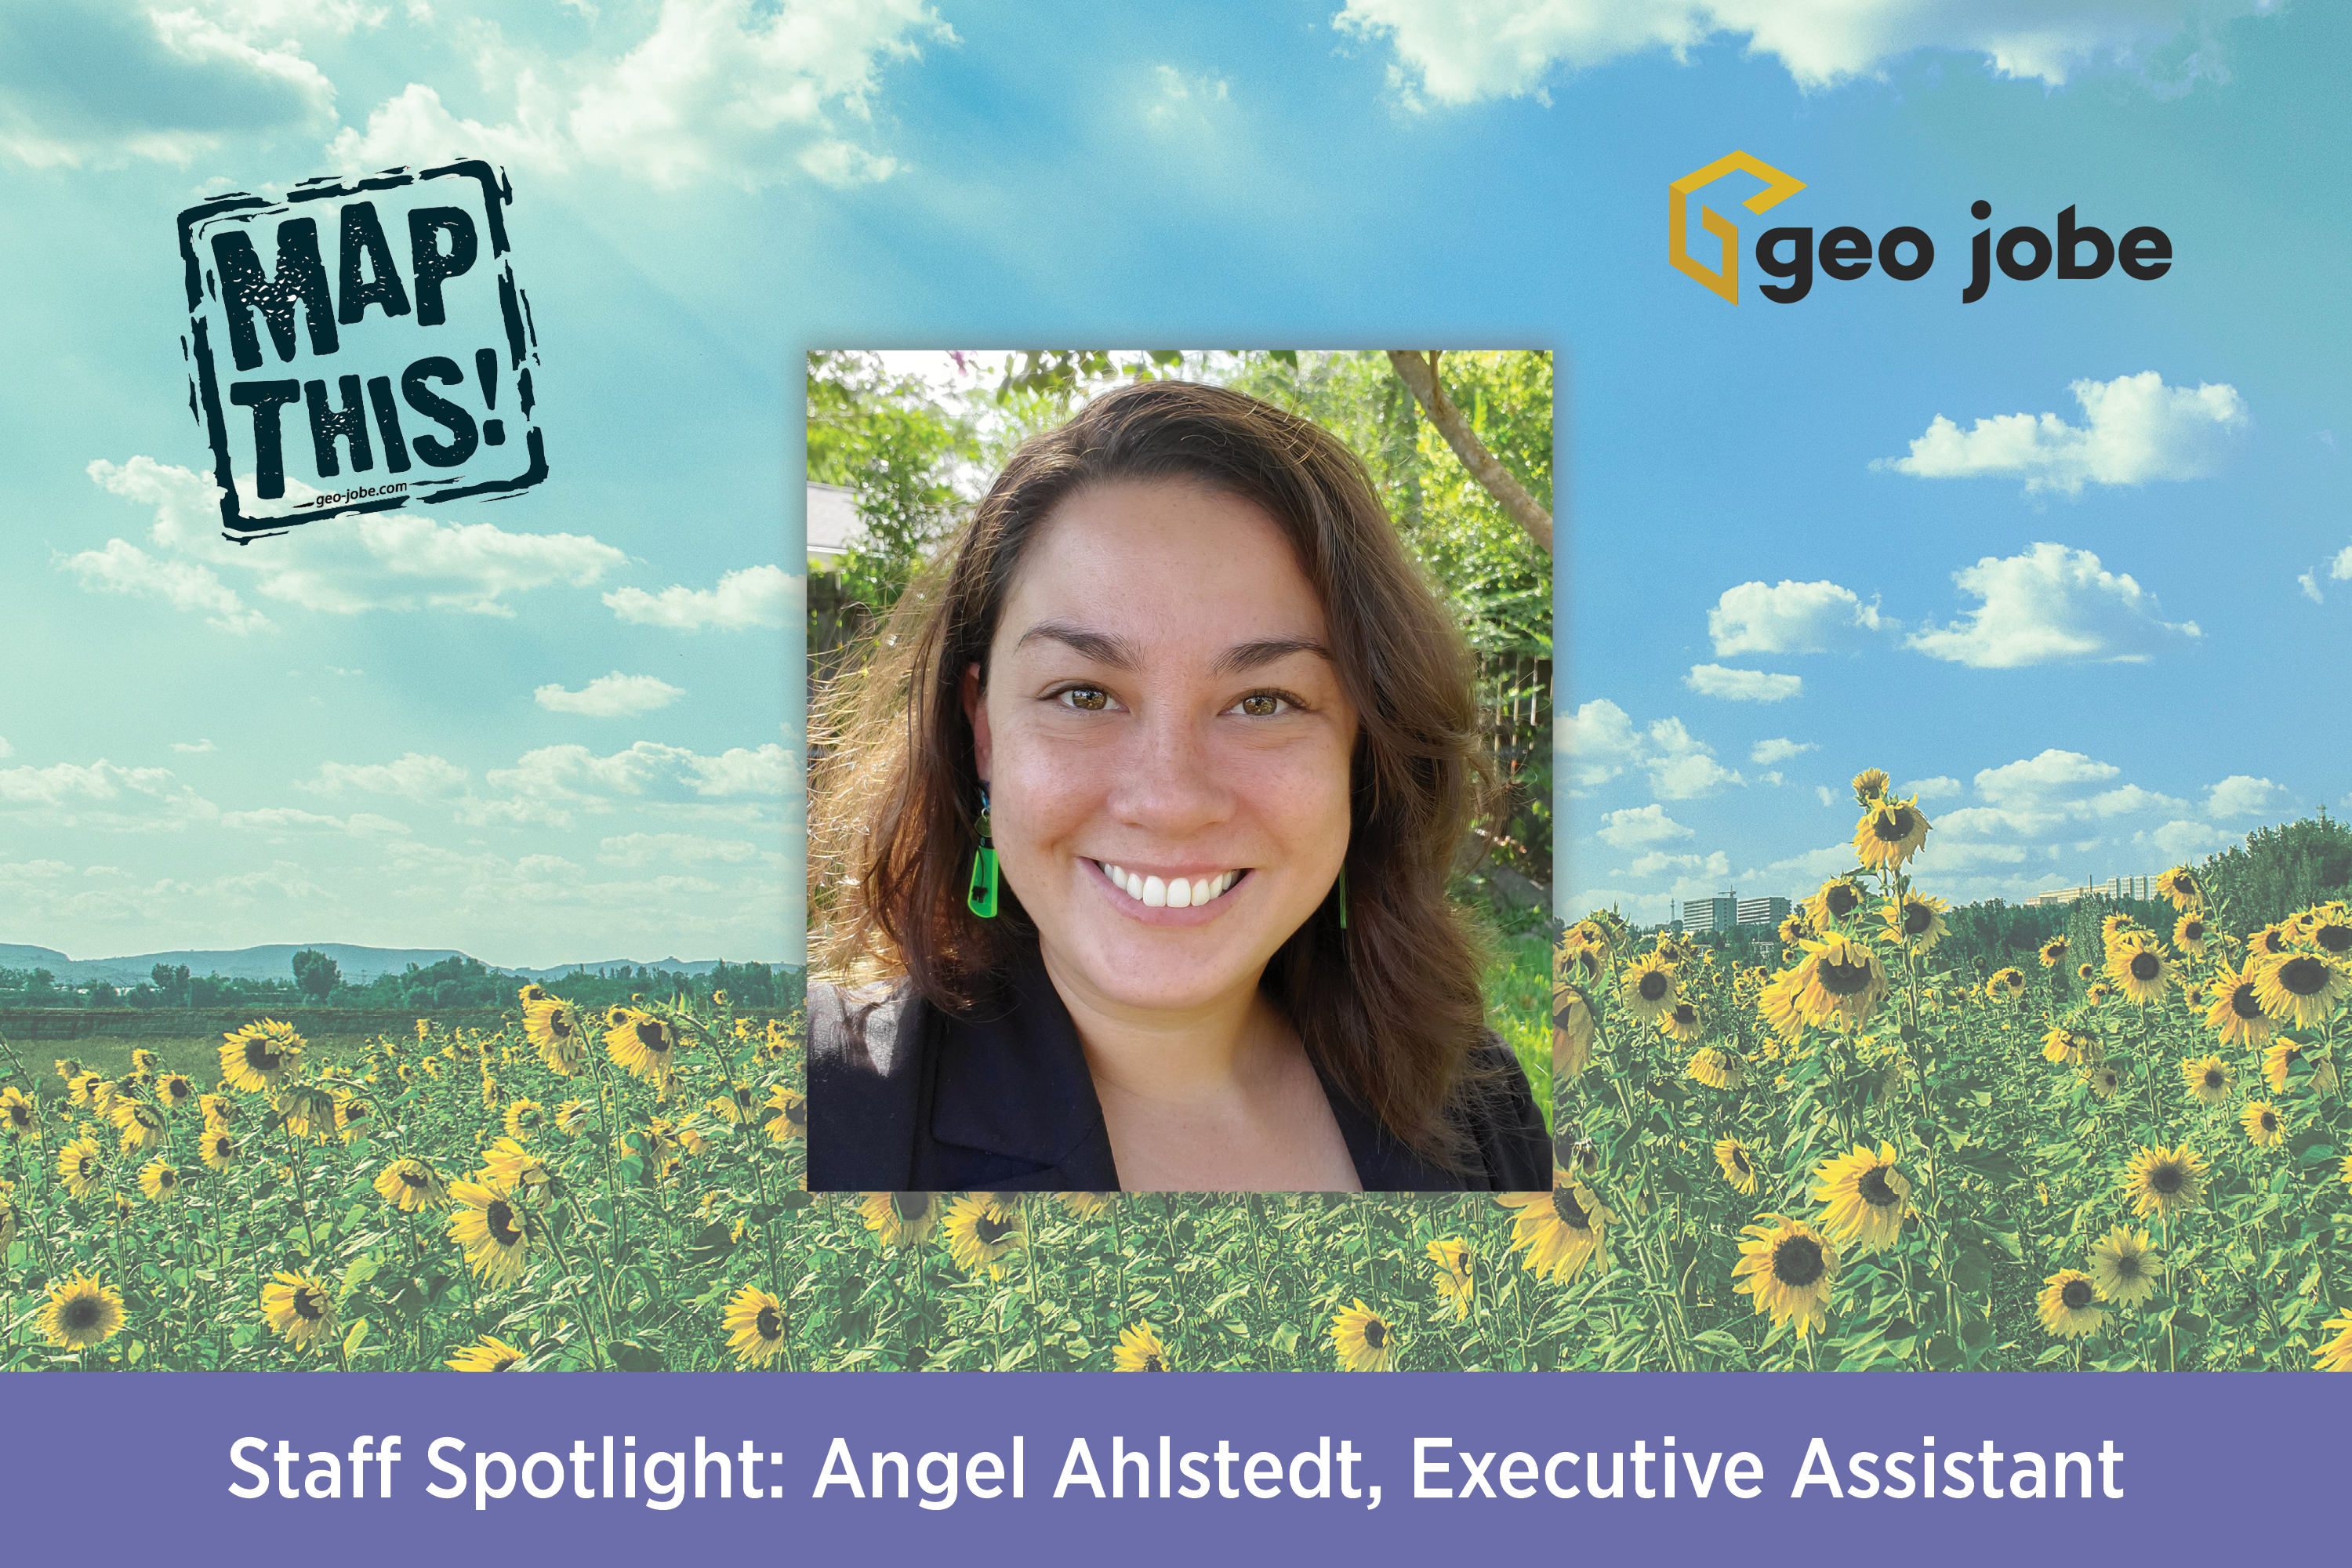 Q&A with GEO Jobe’s Angel Ahlstedt, Executive Assistant